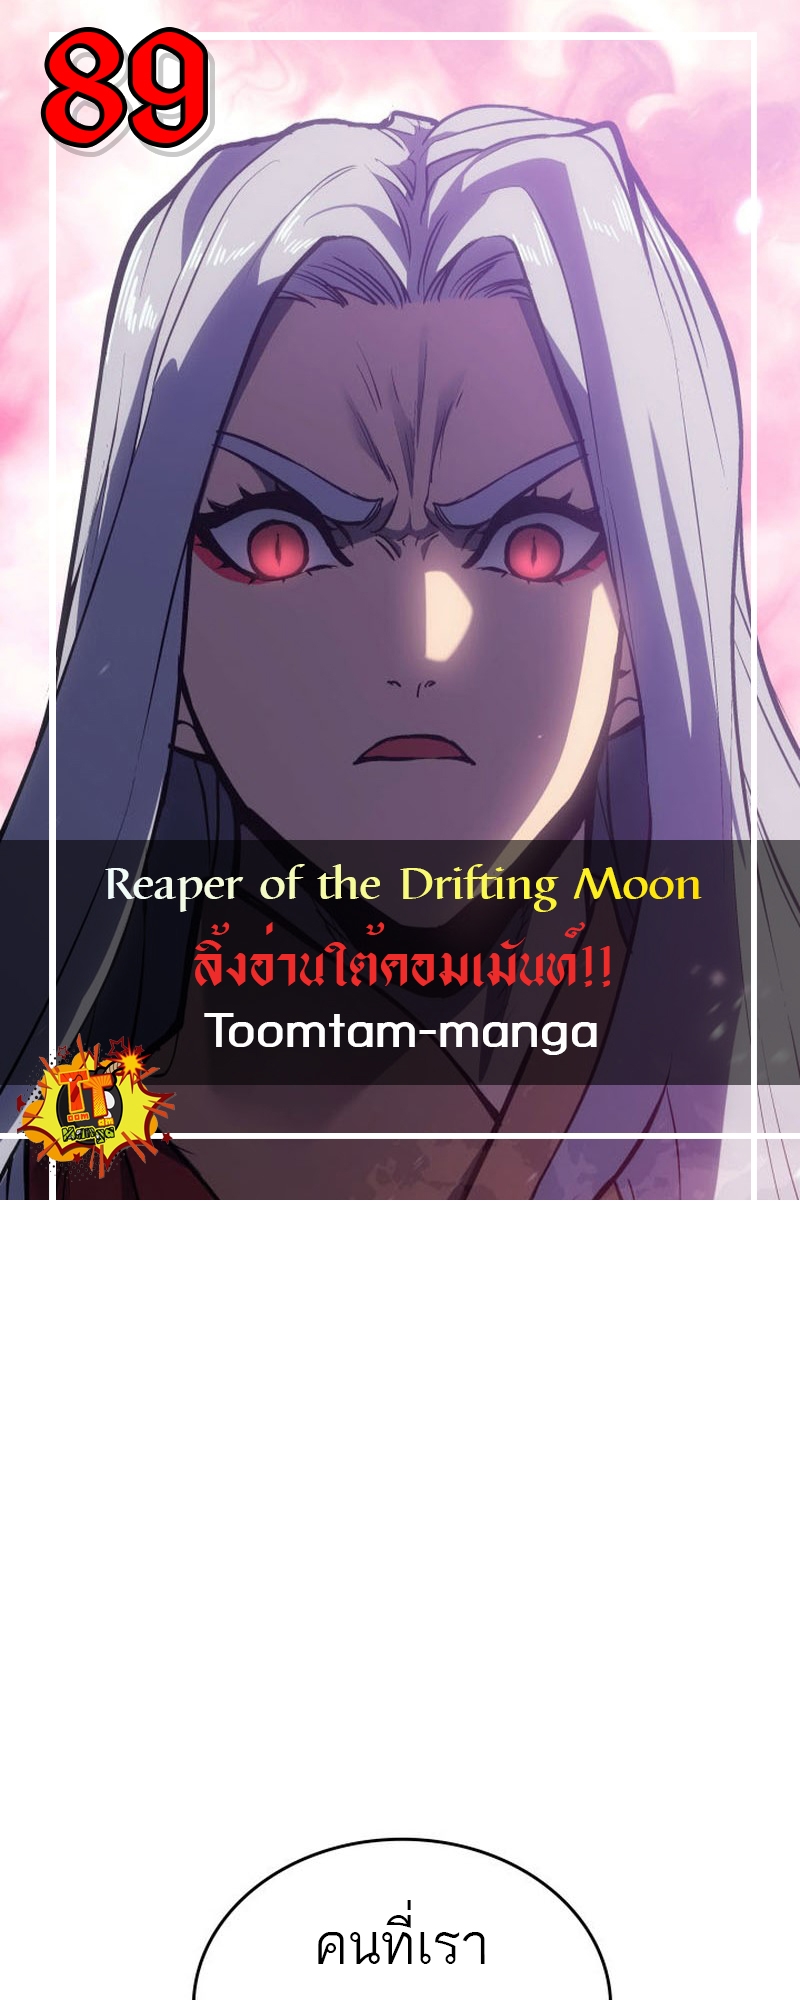 Reaper of the Drifting Moon 89 23 05 25670001